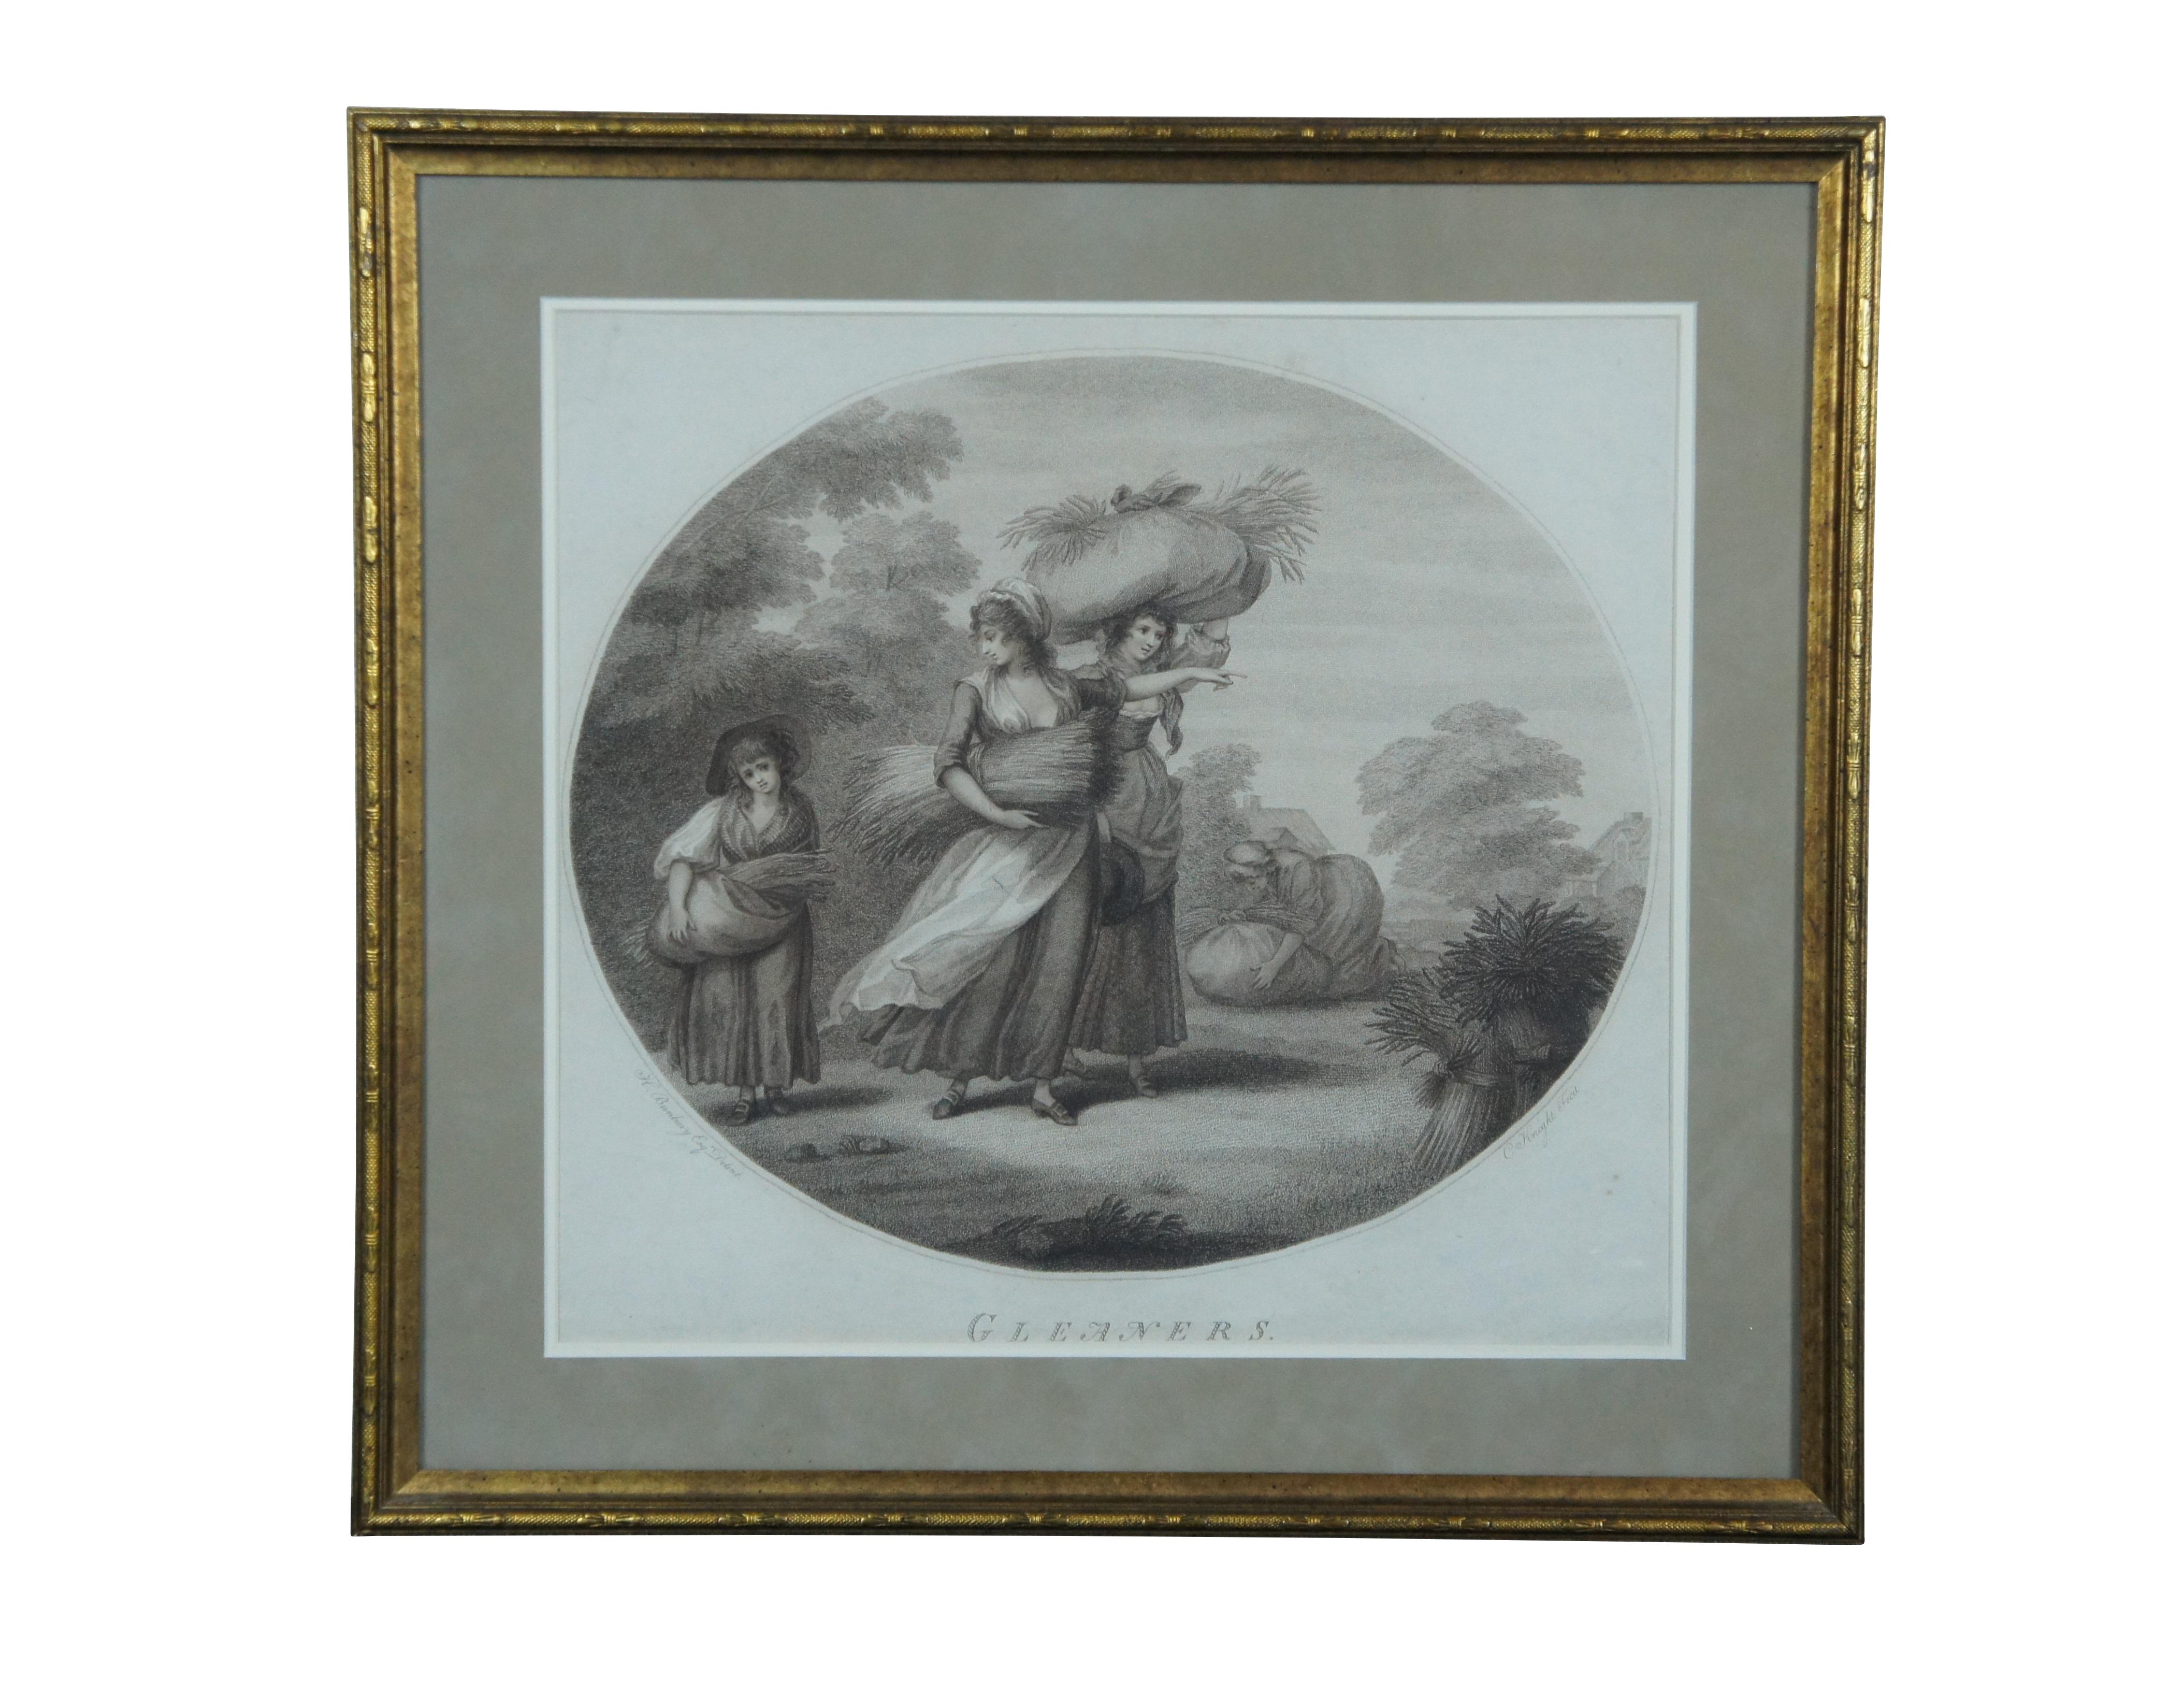 French Provincial 2 Antique 18thC Henry William Bunbury Gleaners Stipple Plate Engravings 21